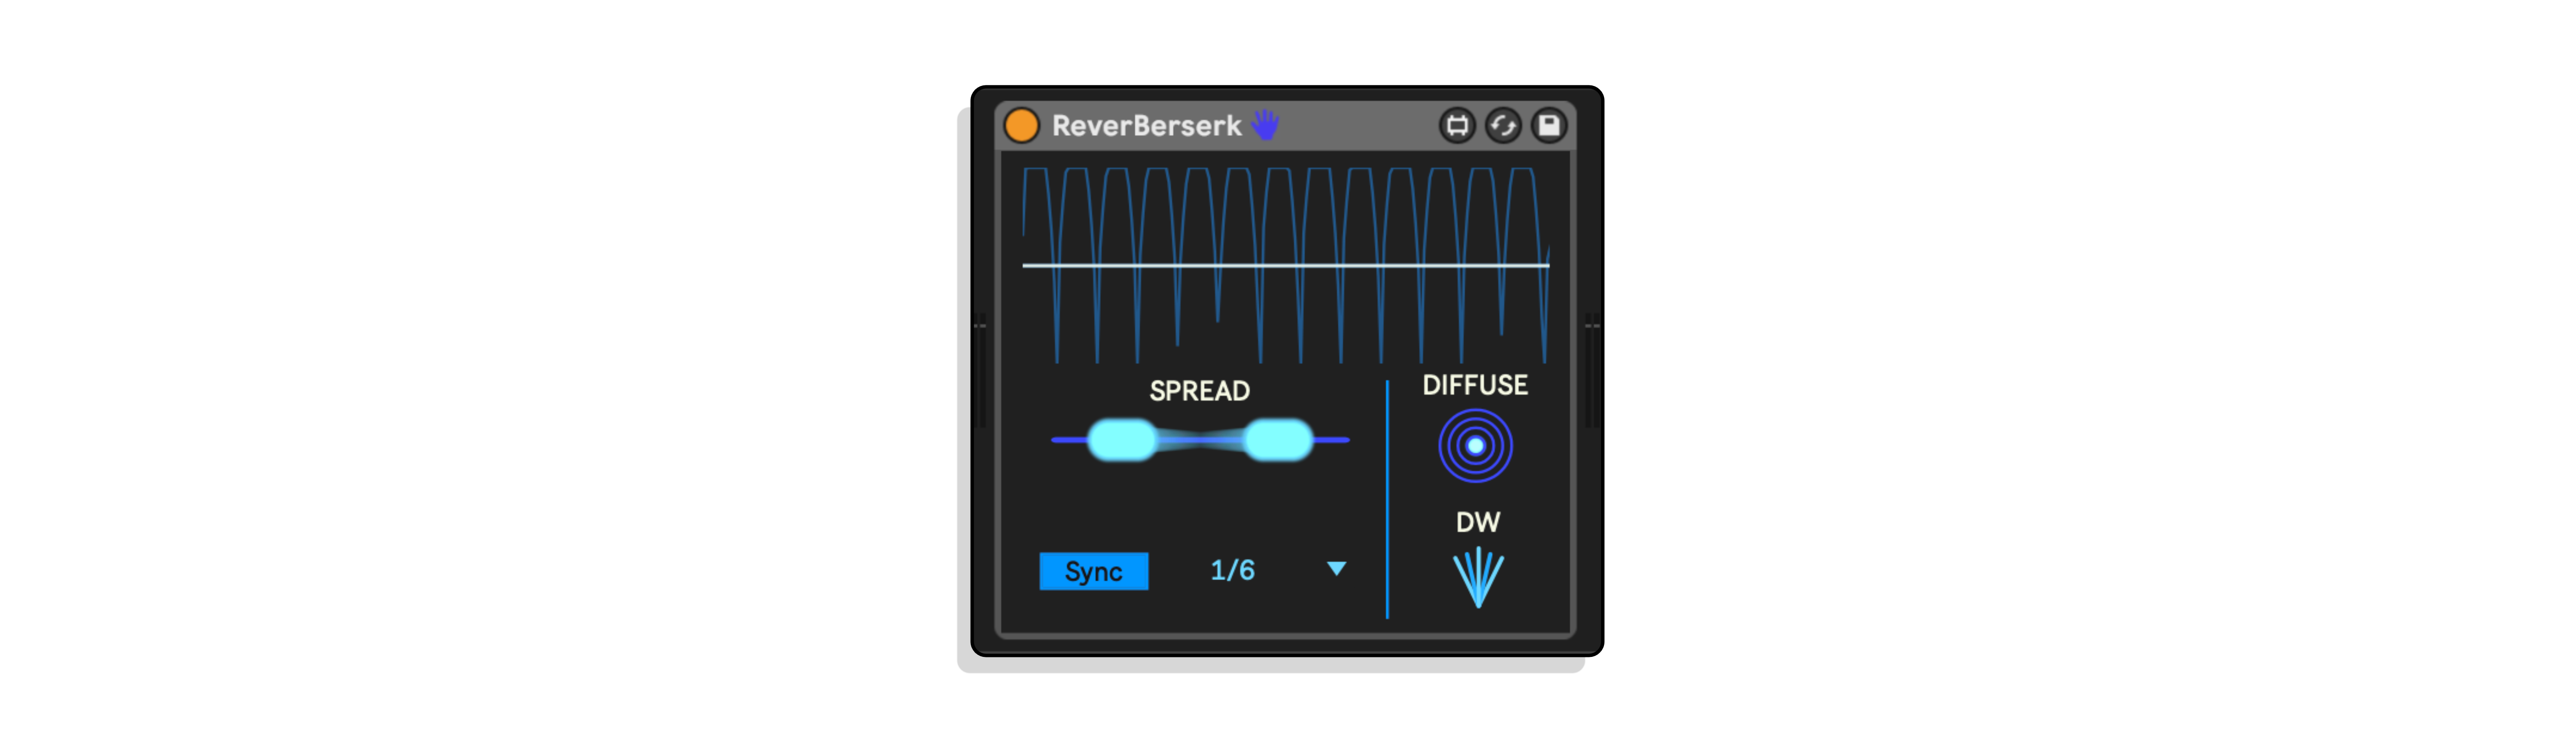 ReverBerserk MaxforLive Device for Ableton Live by AVAL